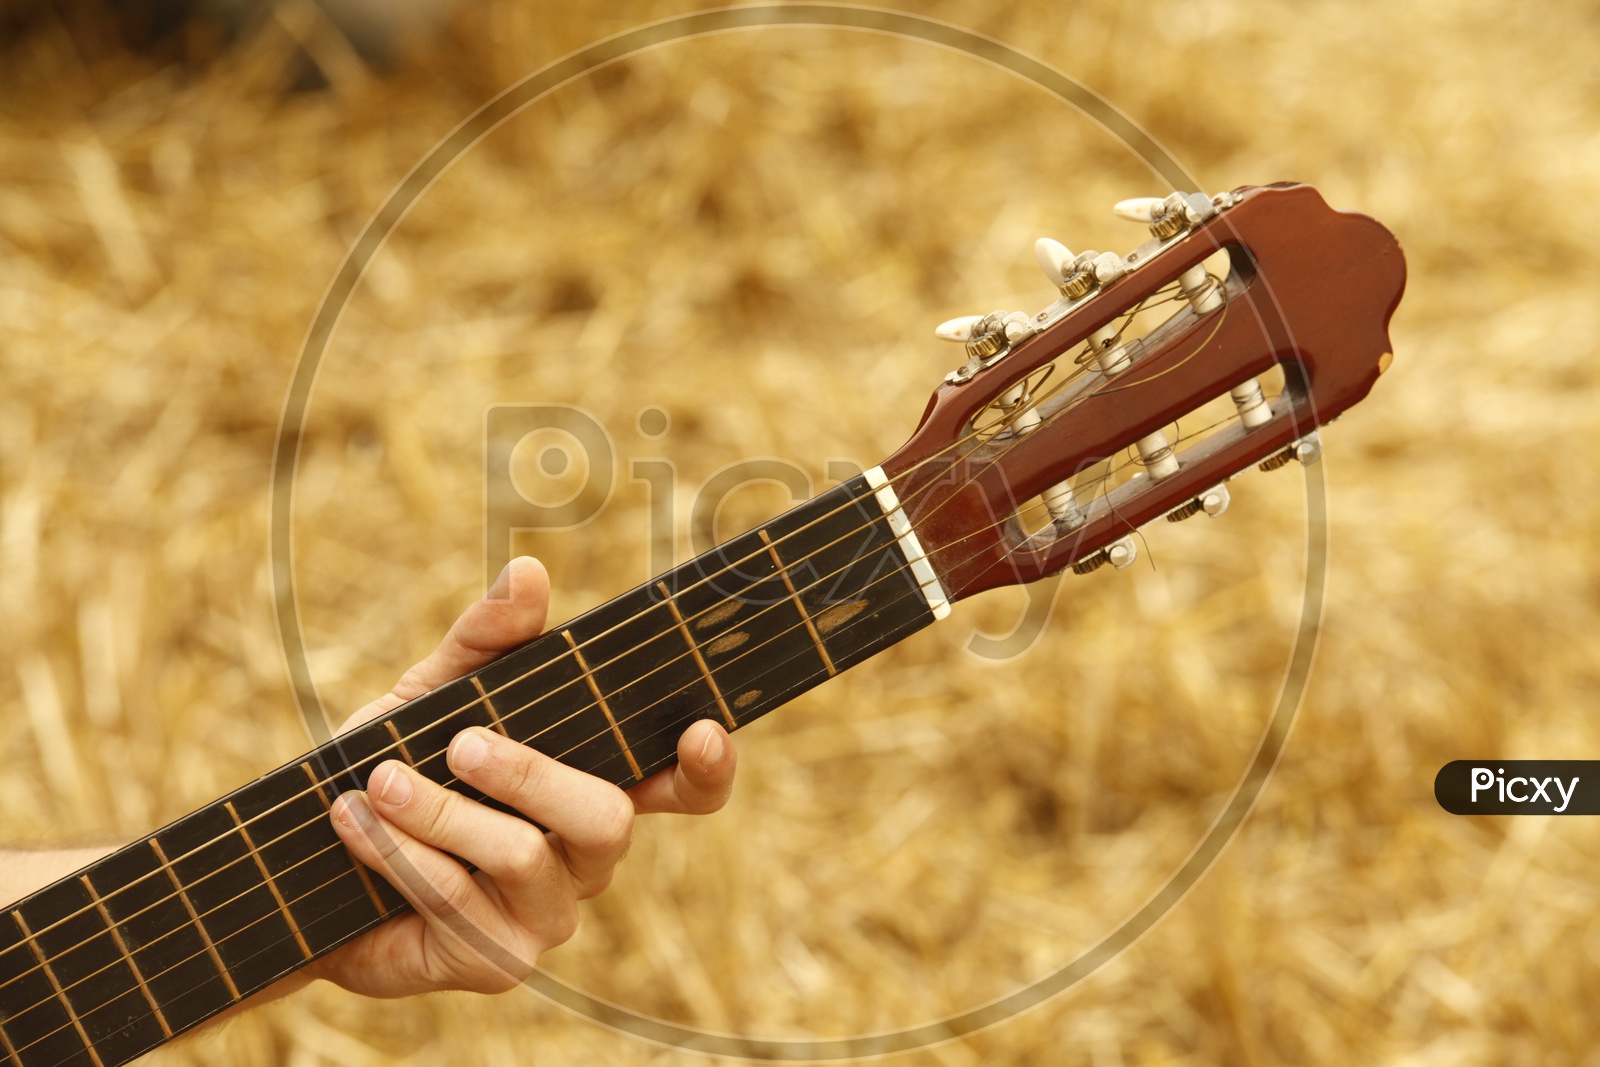 Guitar in the hands of a man